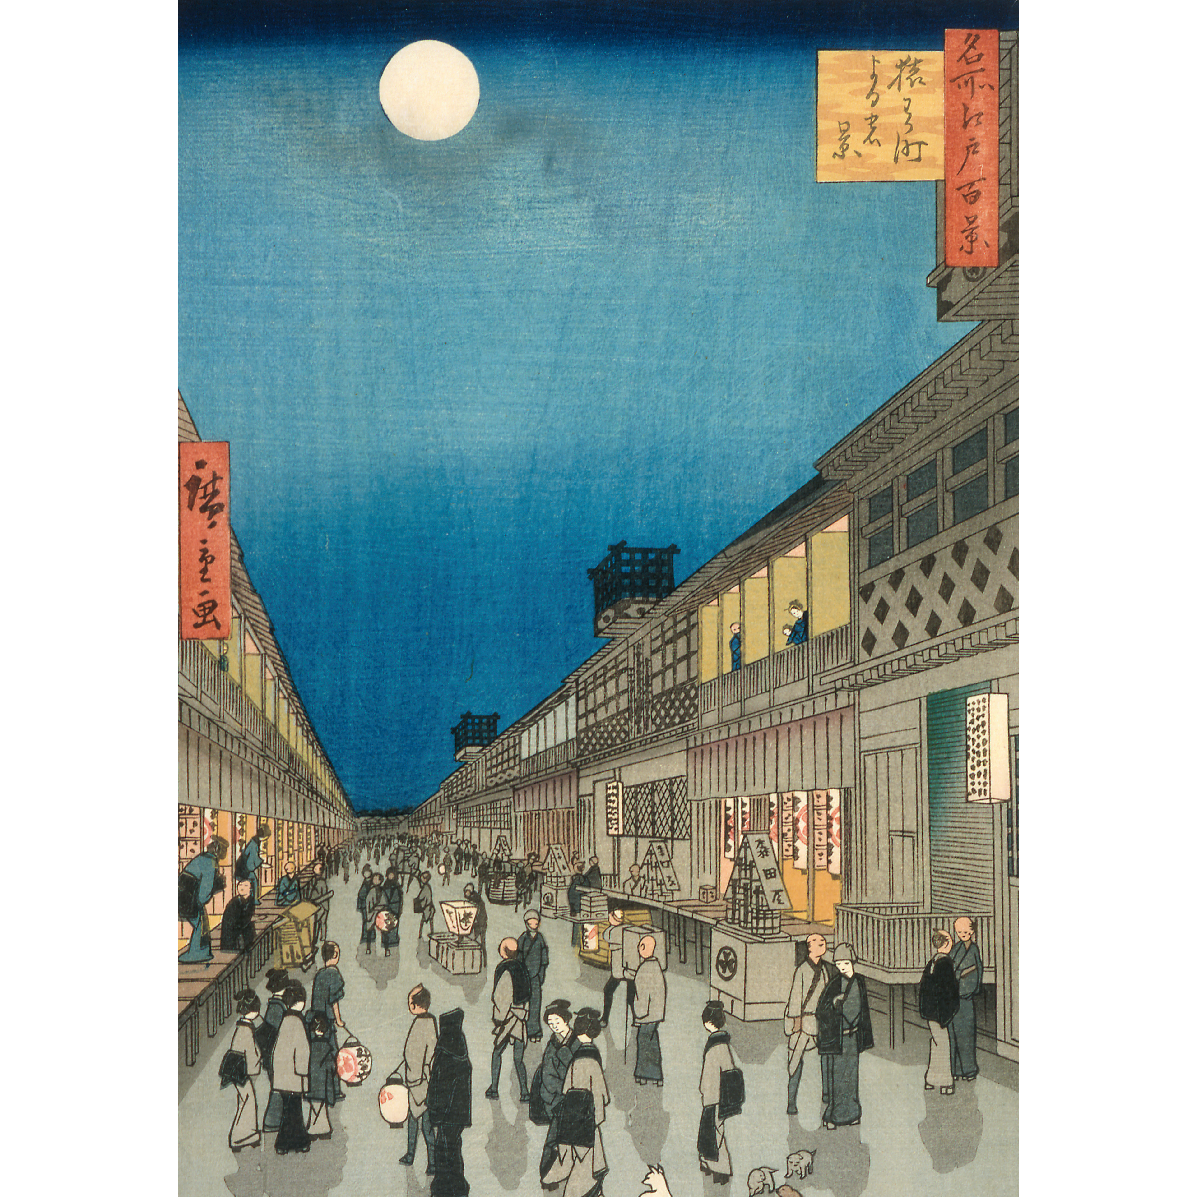 Greetin card - portrait format. Japanese street scene at night, by Utagawa Hiroshige. From the collection of The Fitzwilliam Museum, brought to you by CuratingCambridge.com